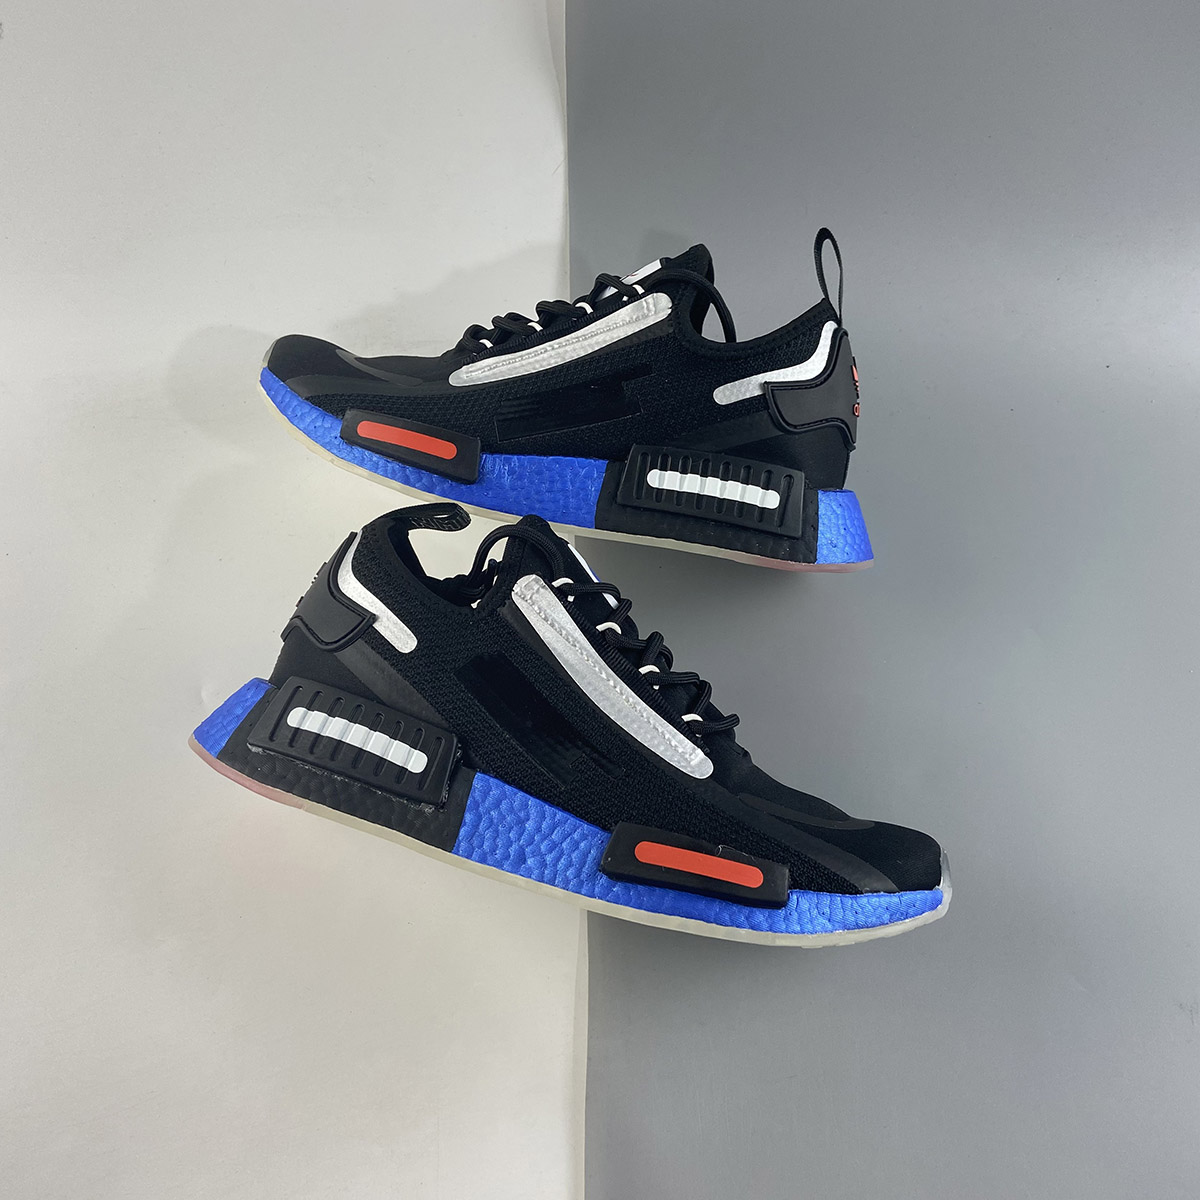 NASA x adidas NMD R1 SPECTOO Black/Solar Red For Sale – Jordans To U